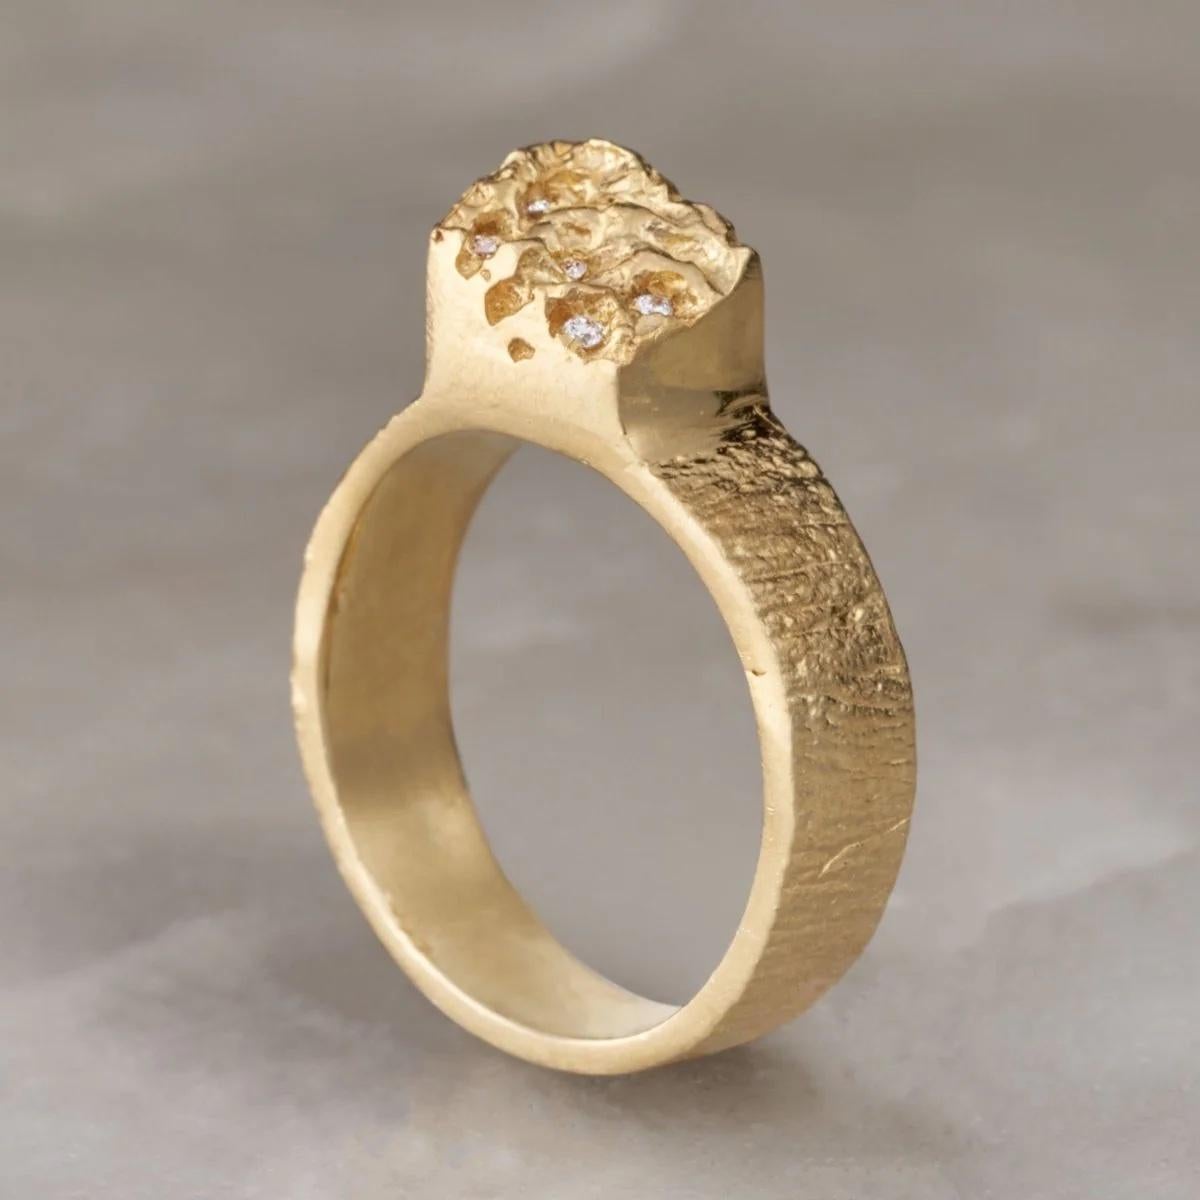 For Sale:  EMBLM Ice Cap Ring – 14K Gold, White Diamonds, Organic, Hand Carved 3